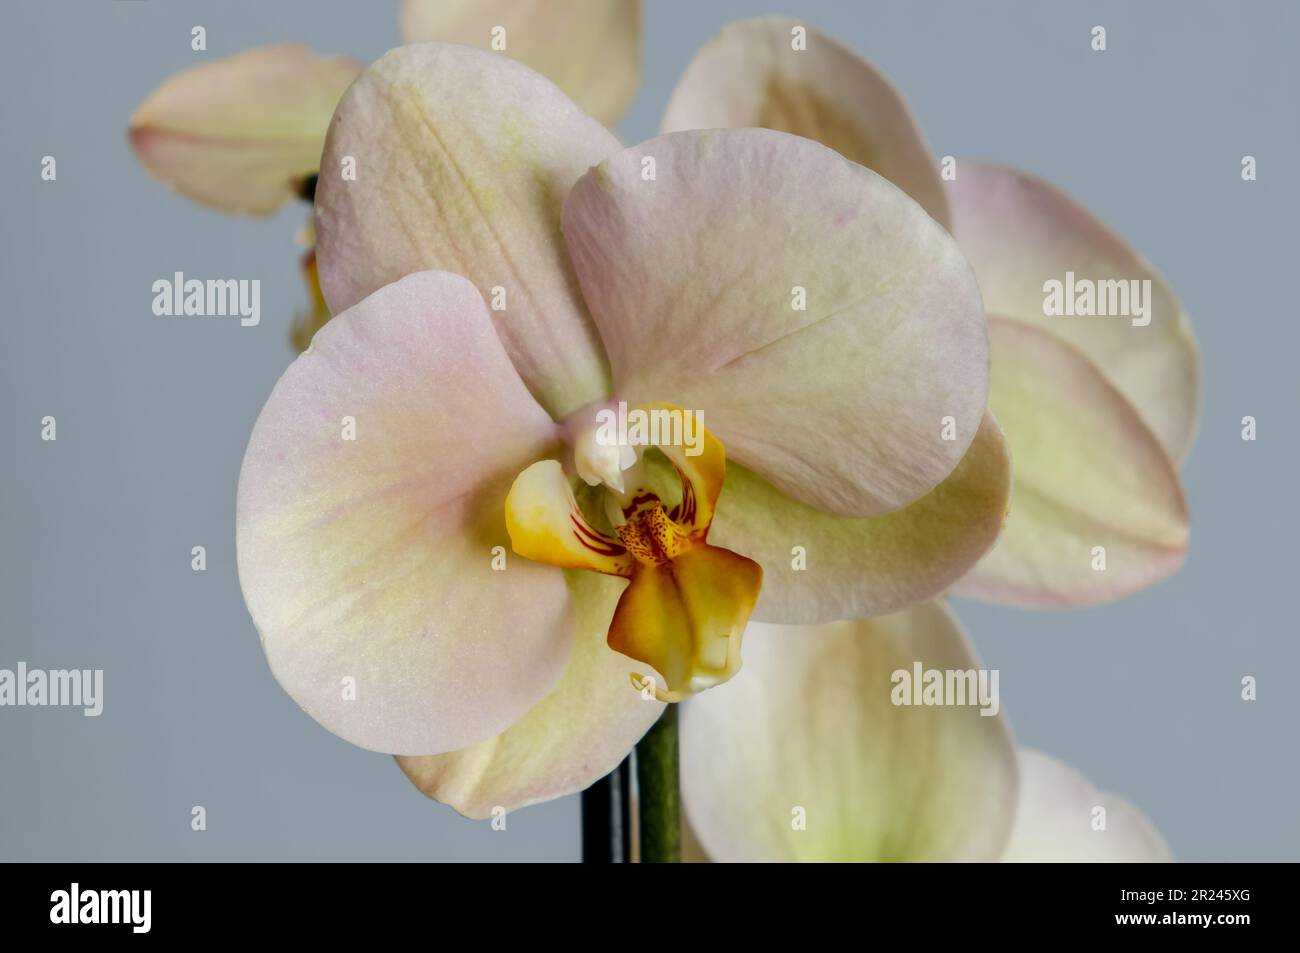 flowers of a blooming Phalaenopsis orchid, isolated from the background, a decorative plant with yellow-pink petals, close-up on a gray background Stock Photo